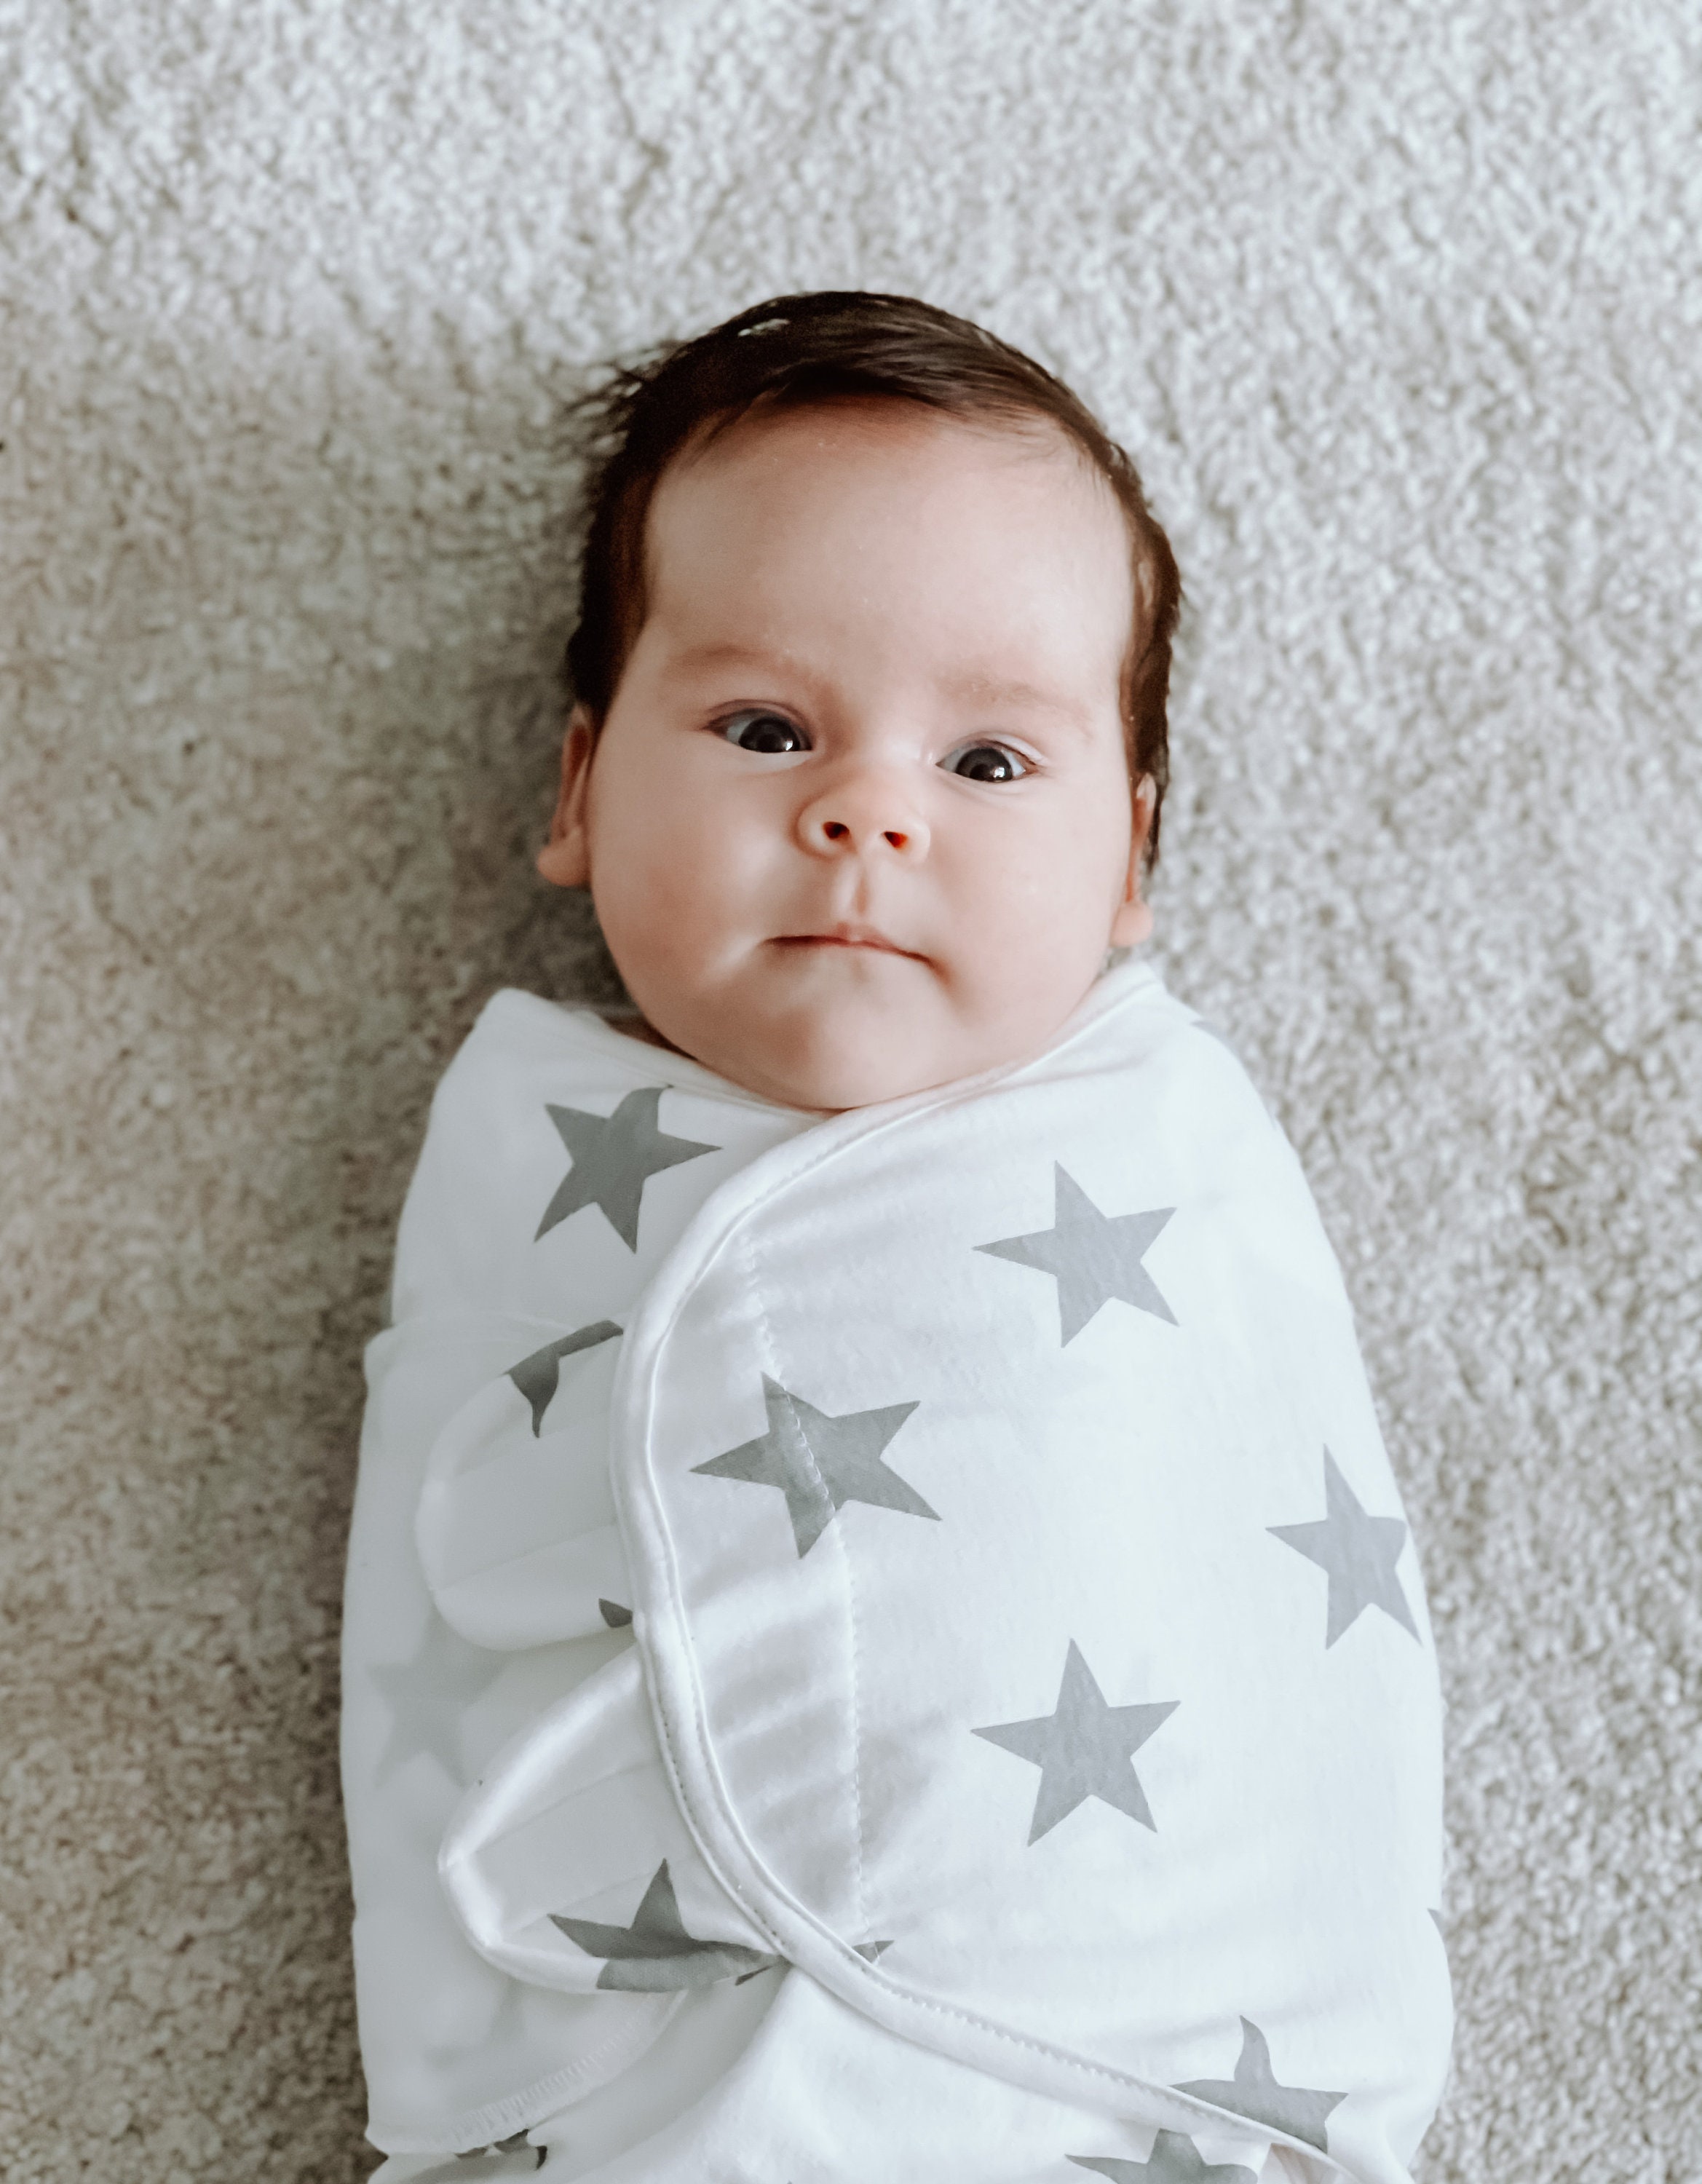 Baby Swaddle Blanket Wrap for Newborn & Infant, 0-3 Months 100